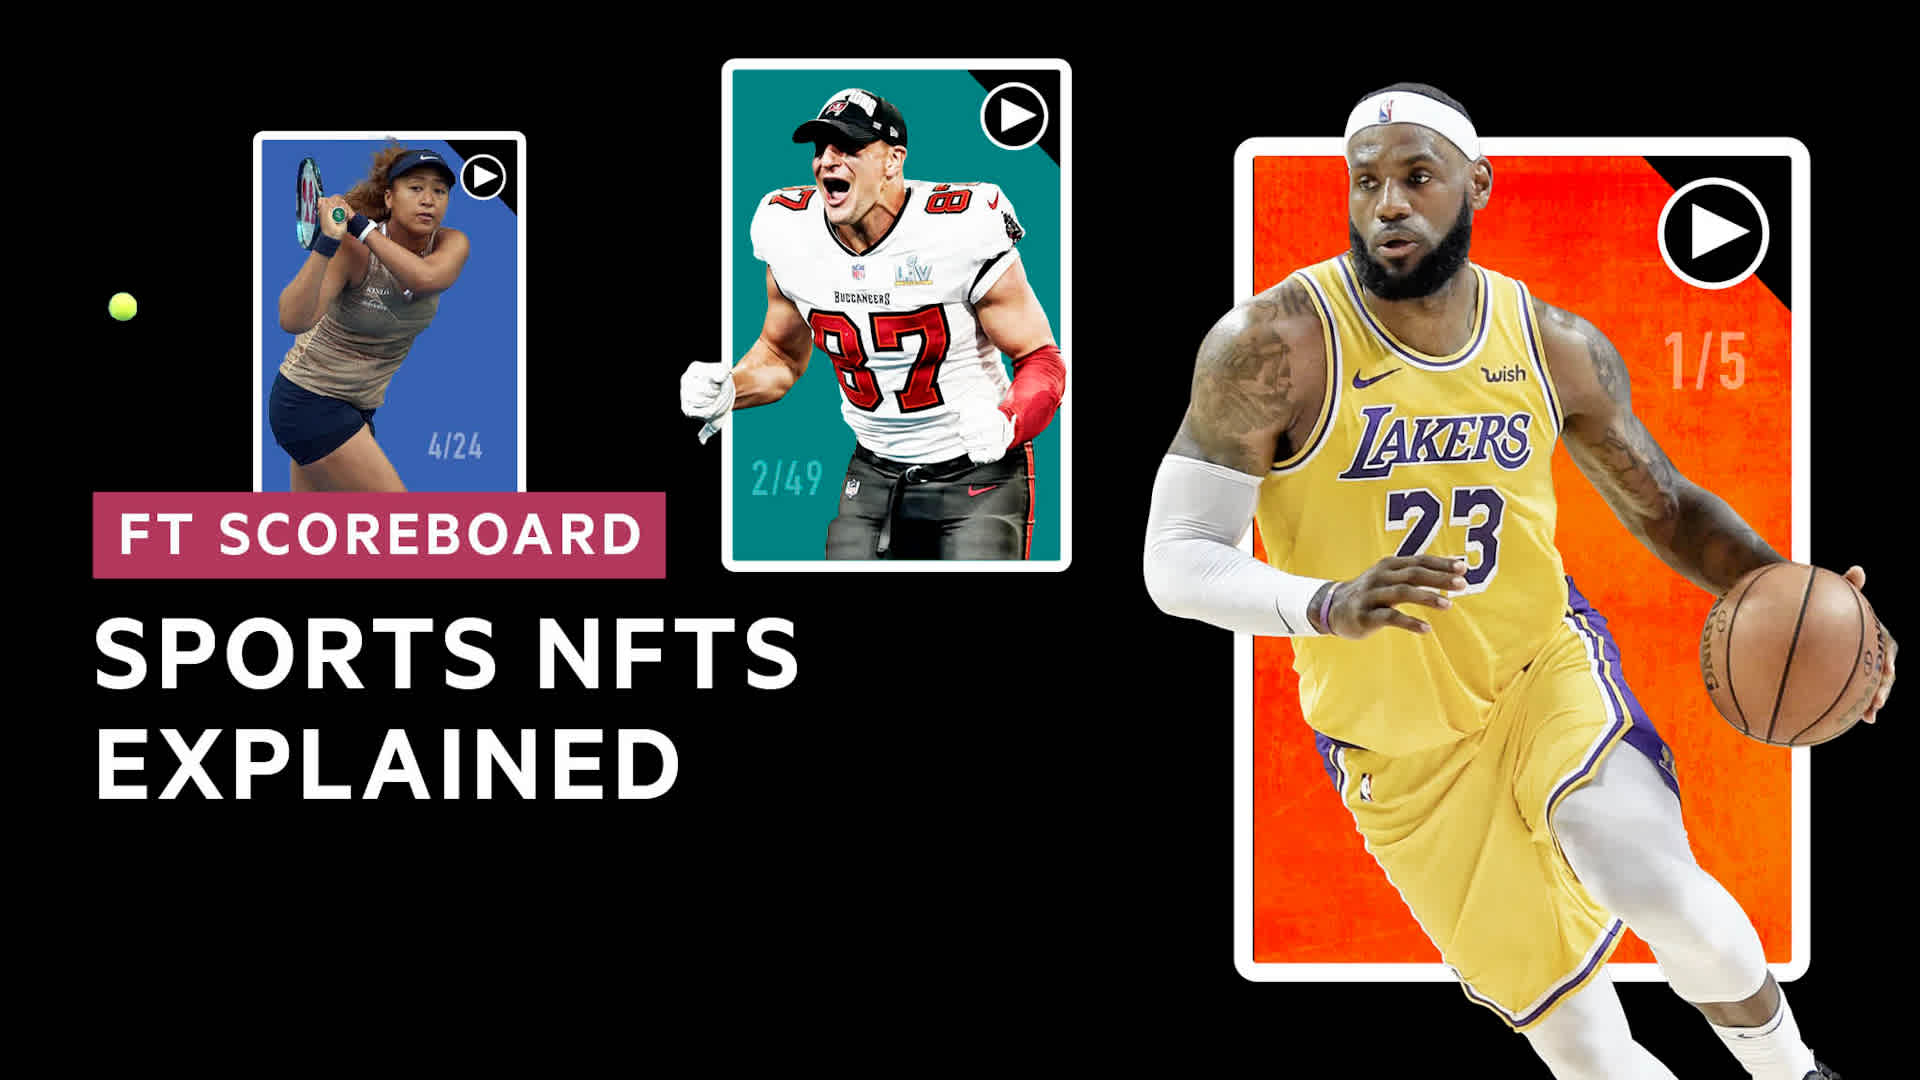 Sports NFTs: collectors, players and leagues cash in on the action